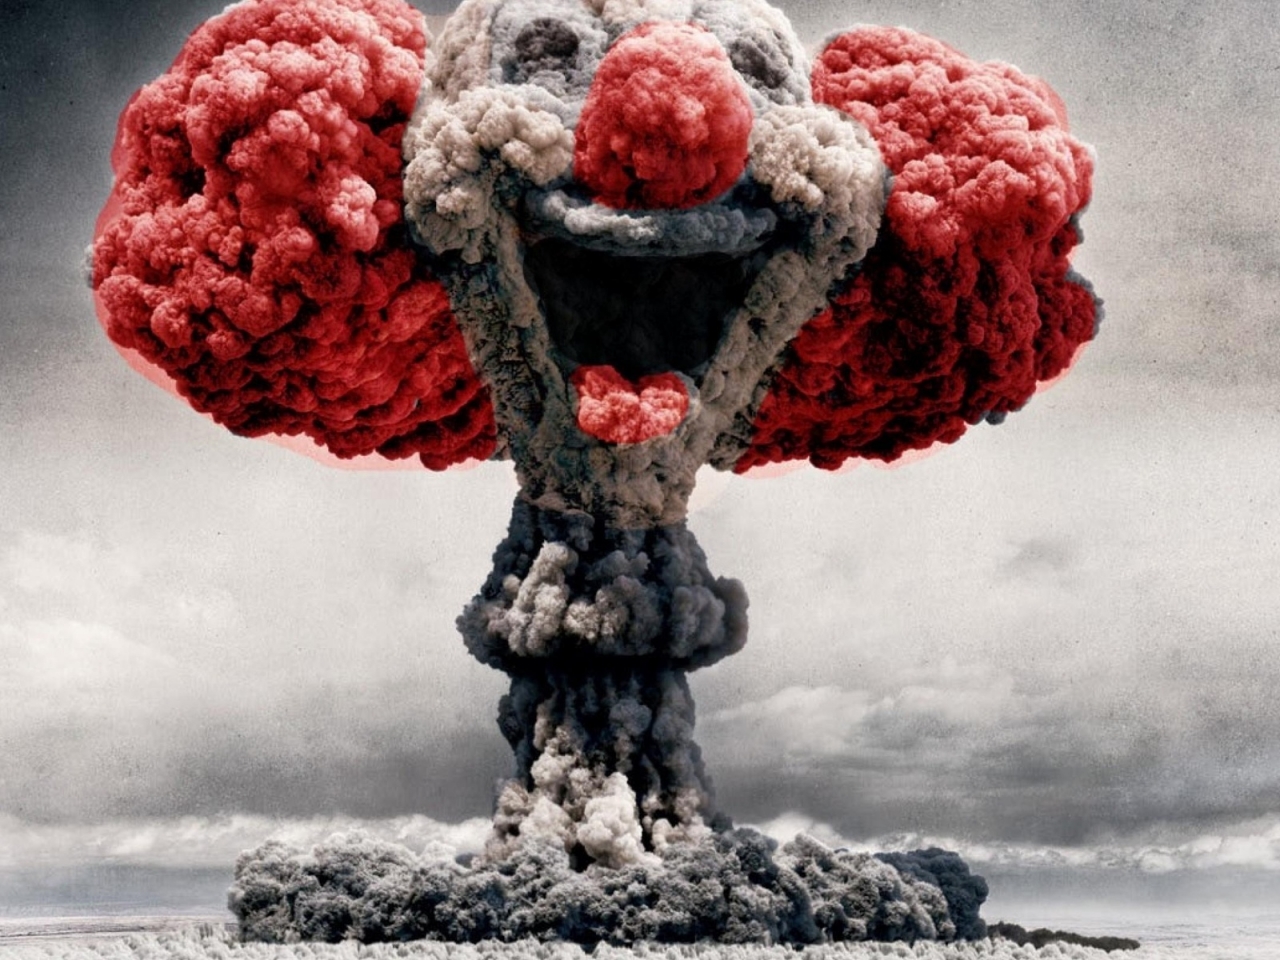 Nuclear Clown for 1280 x 960 resolution